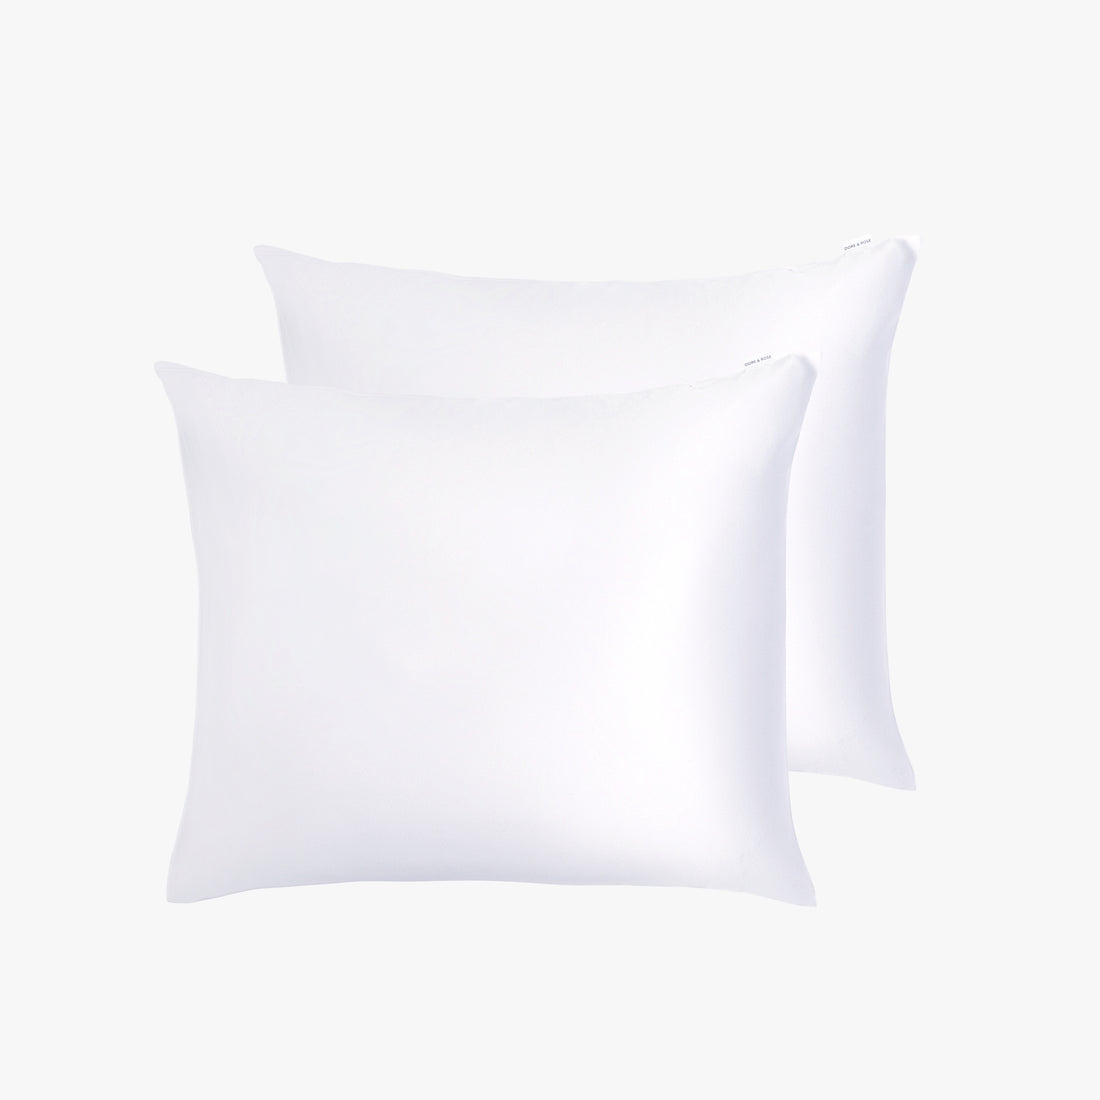 2 White Silk Pillowcases on top of each other